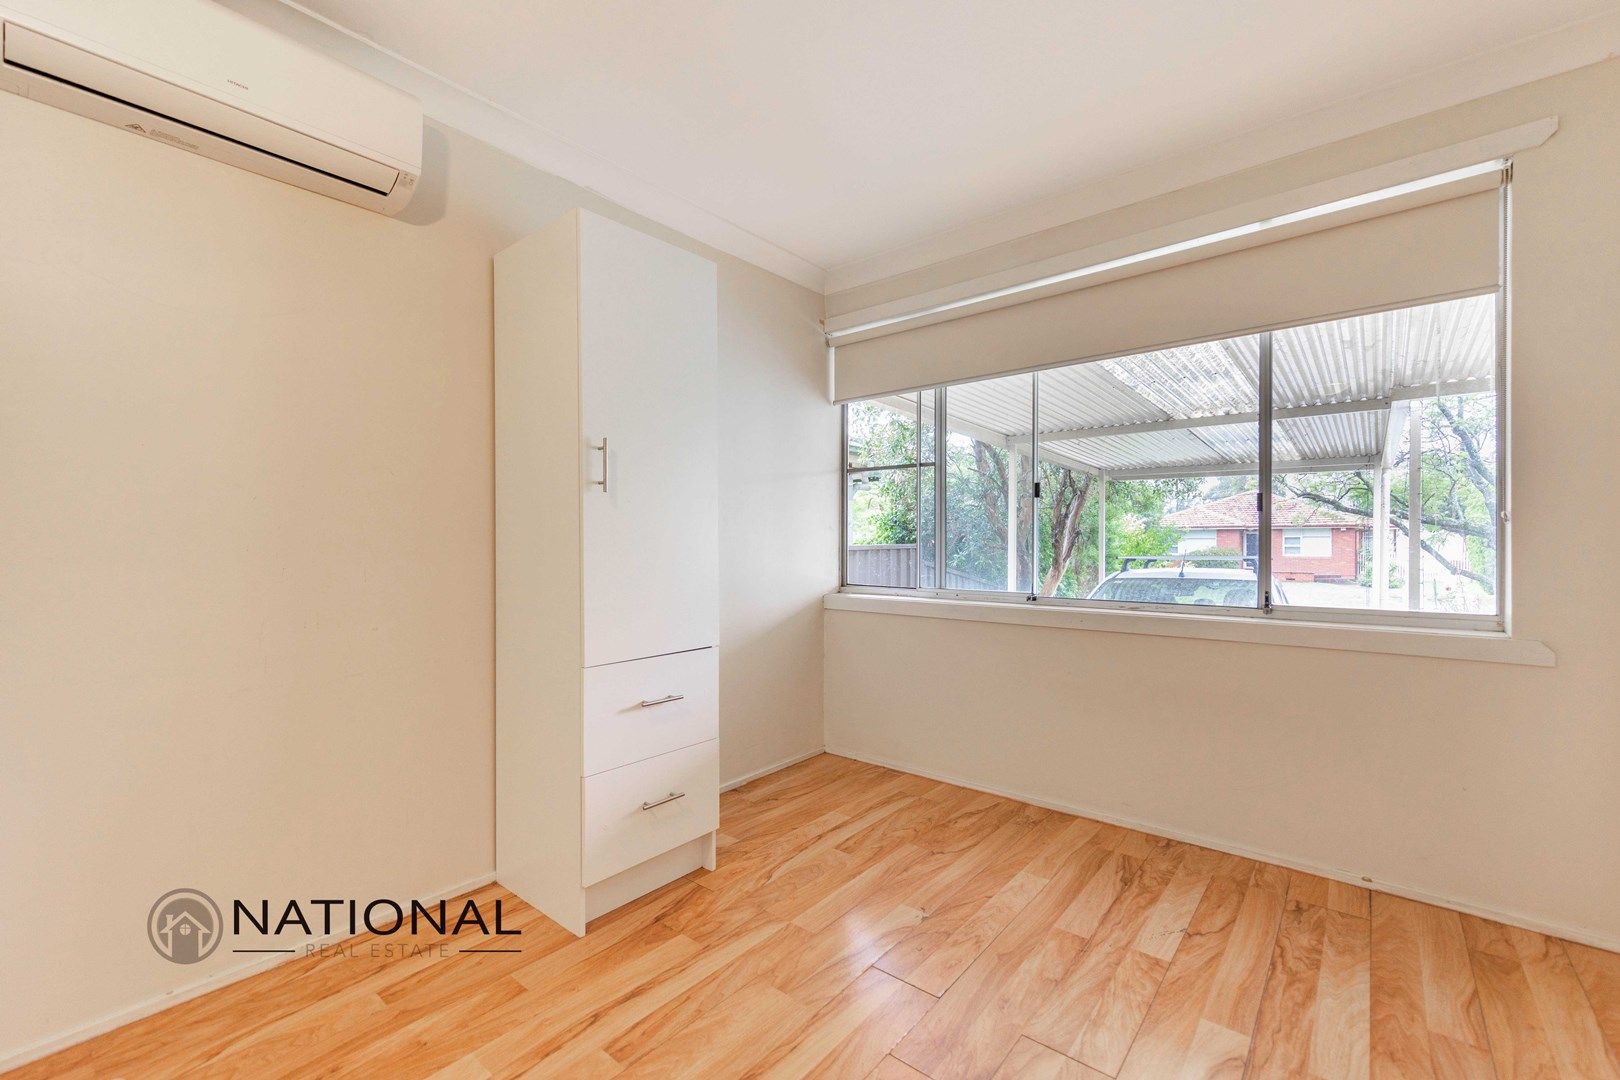 45a Greenleaf St, Constitution Hill NSW 2145, Image 1